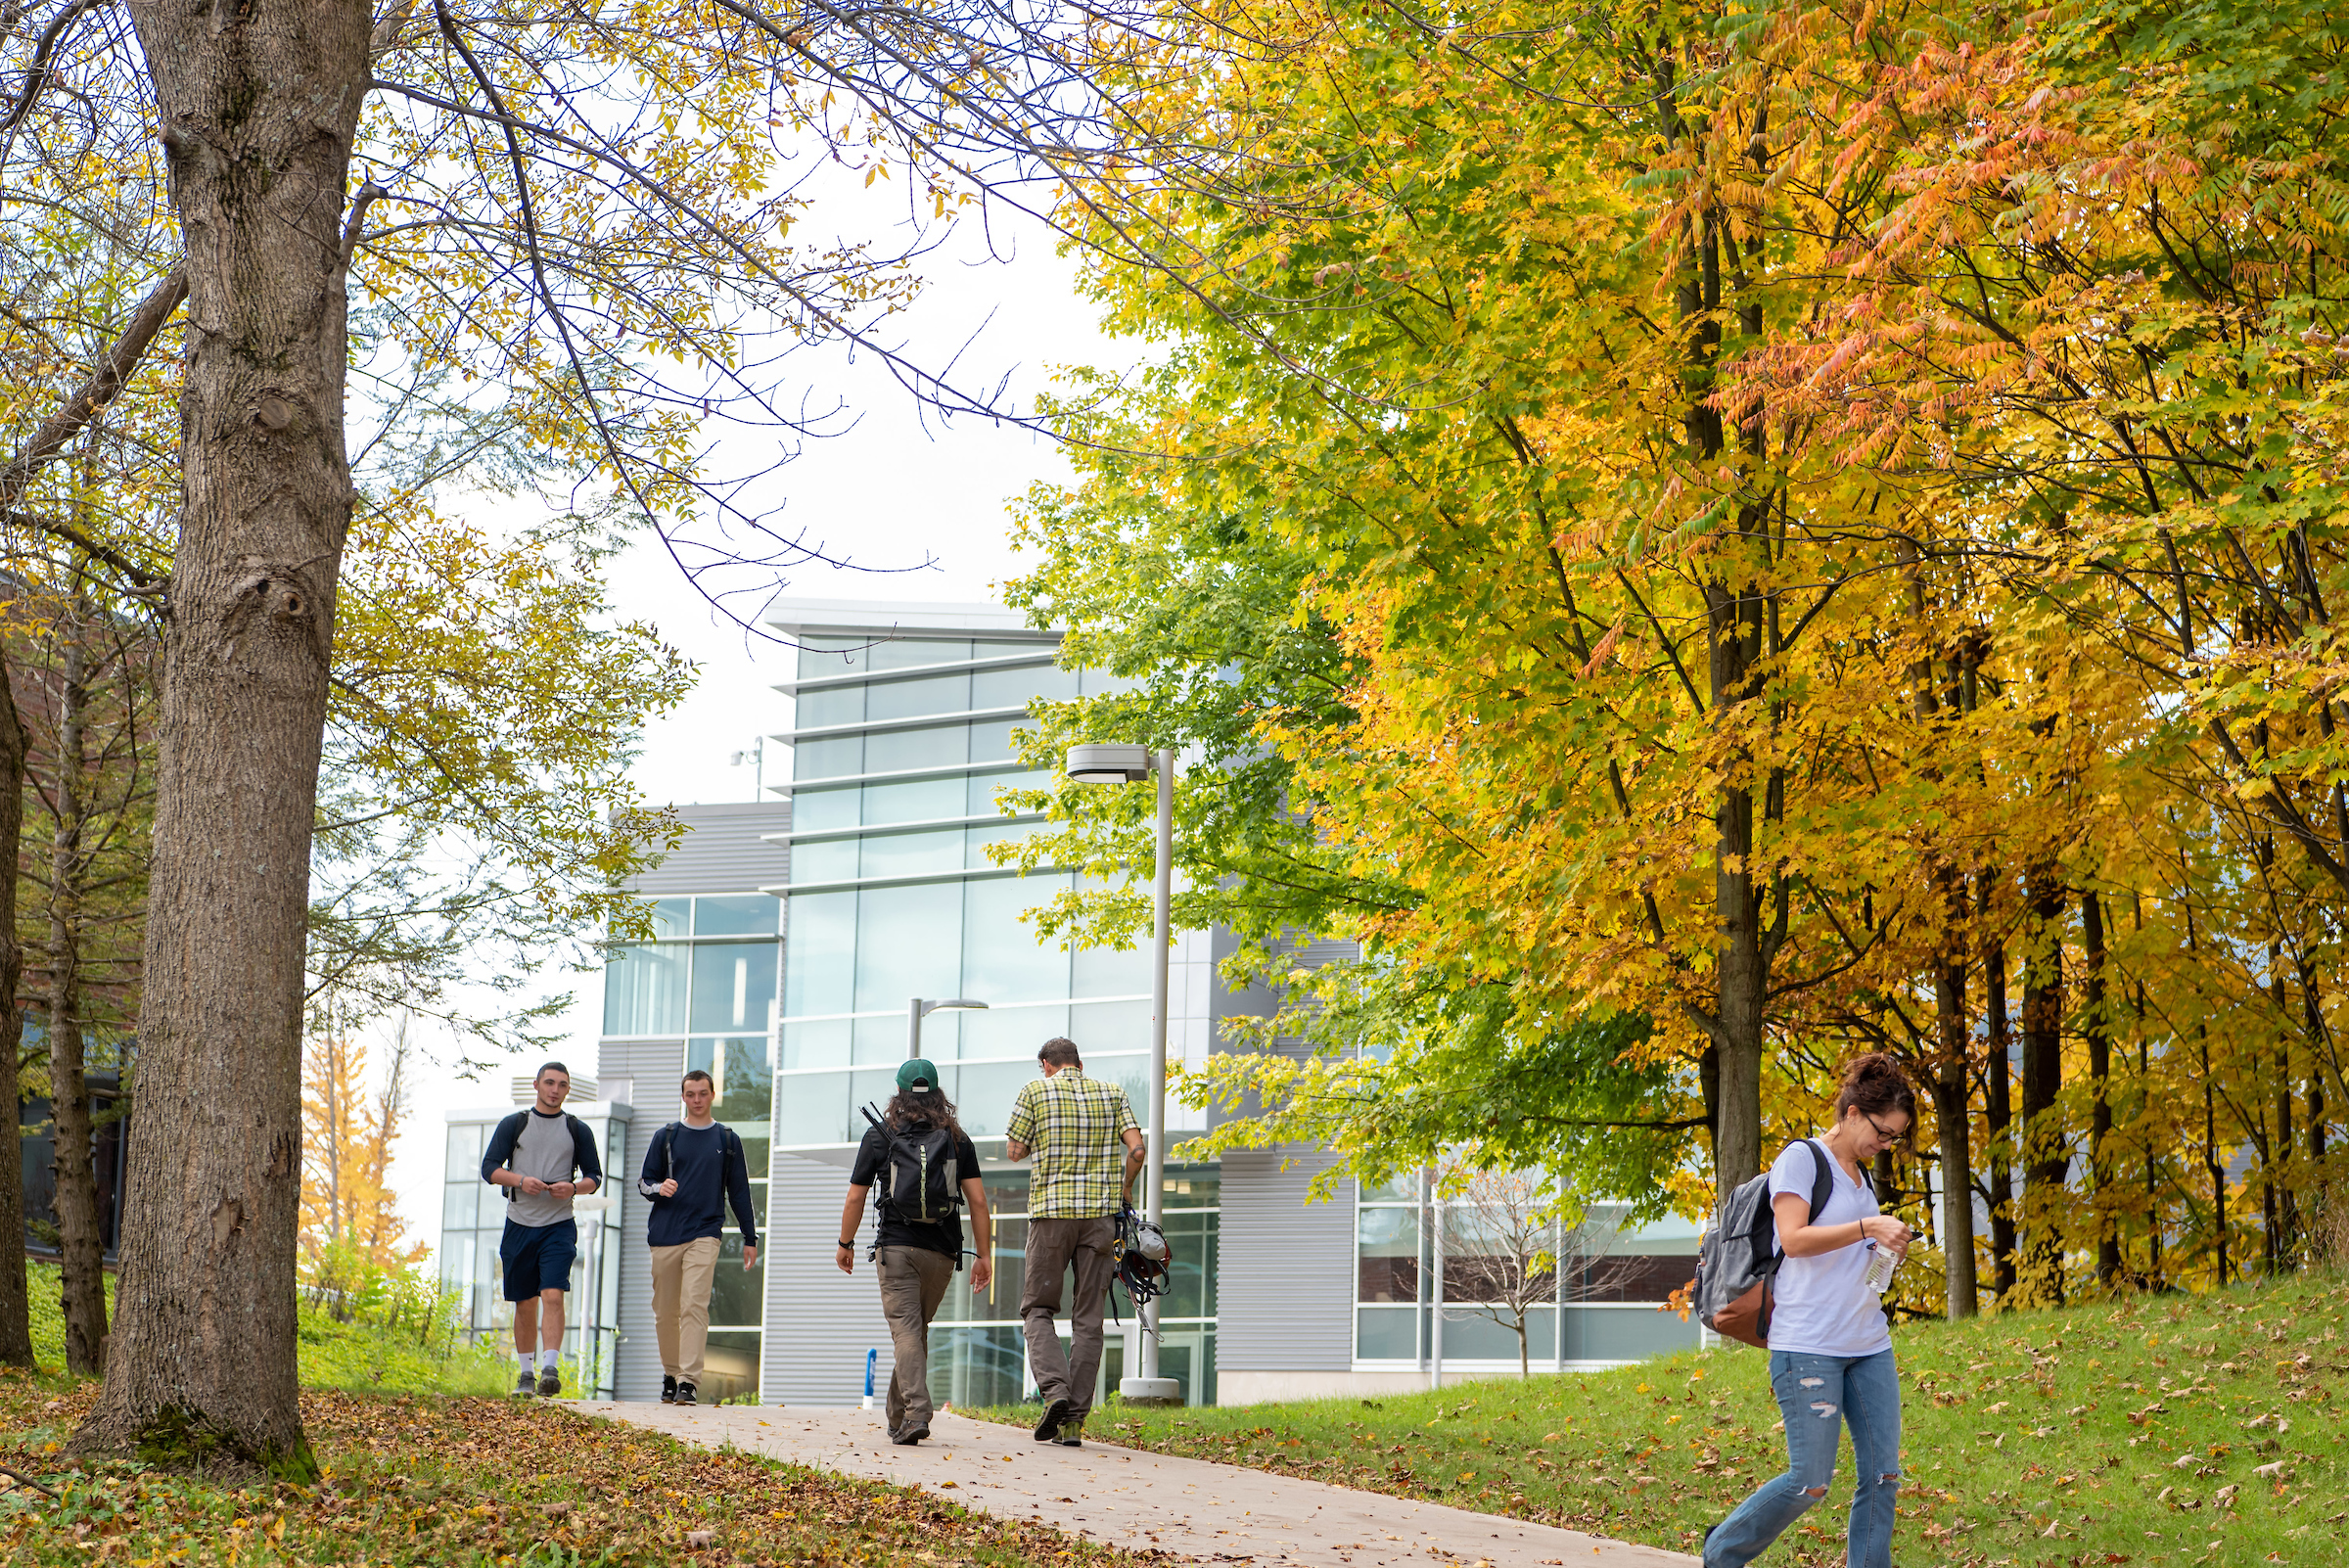 Students walk along a tree-lined path on campus